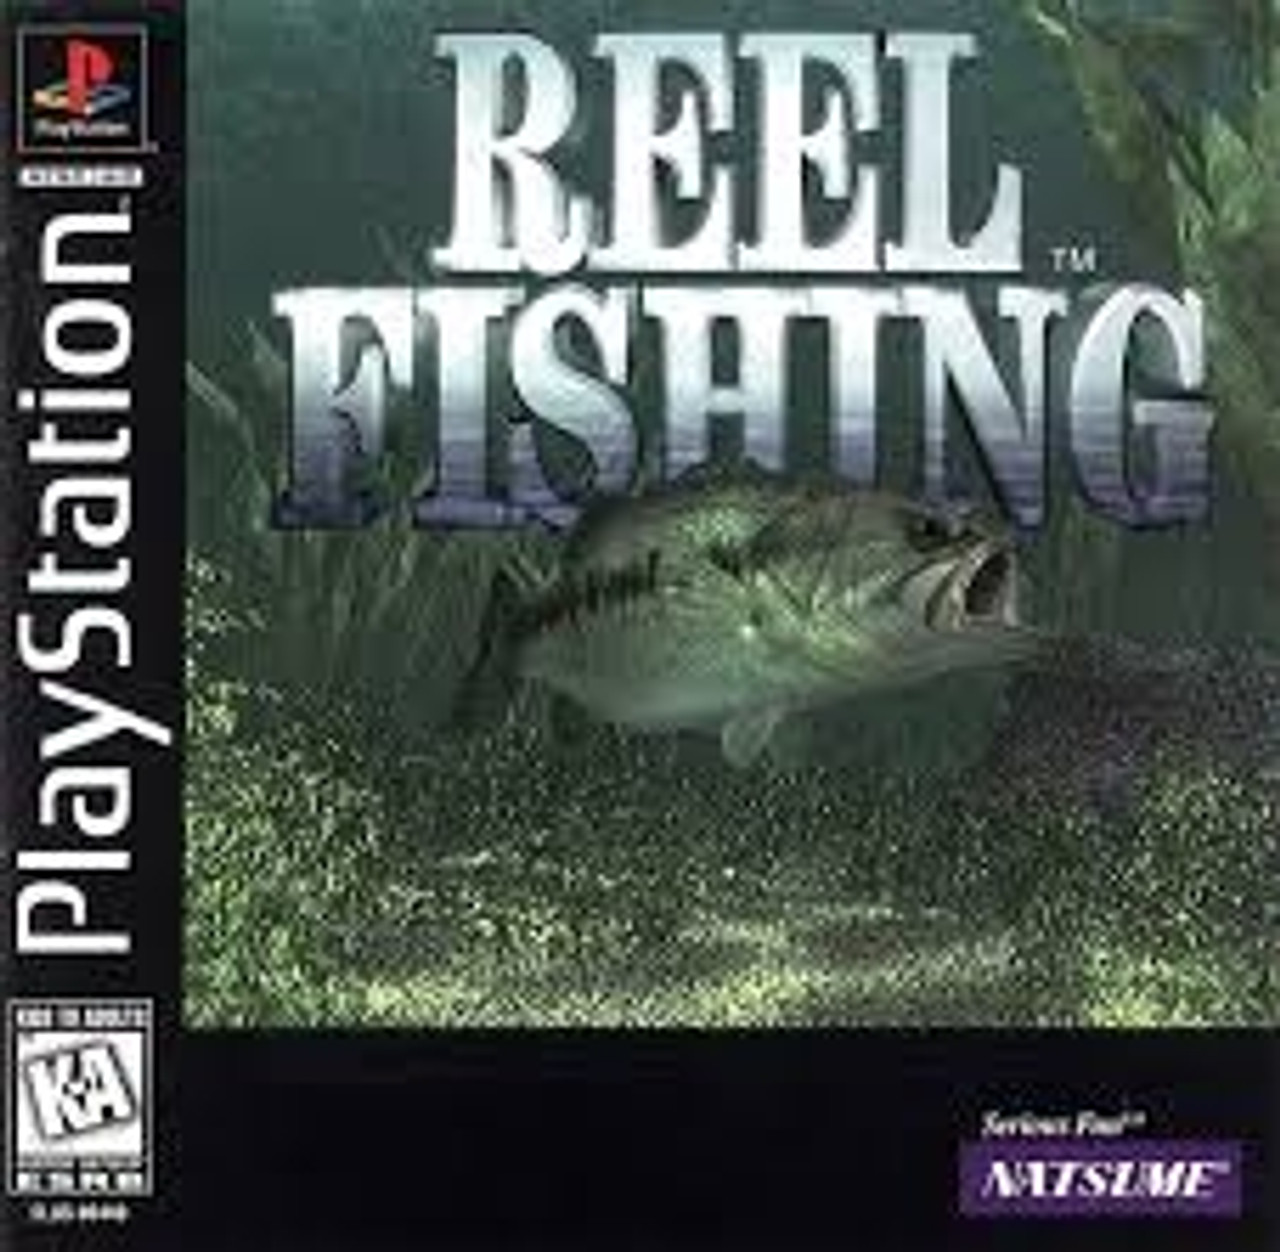 Reel Fishing Playstation 1 PS1 Game For Sale